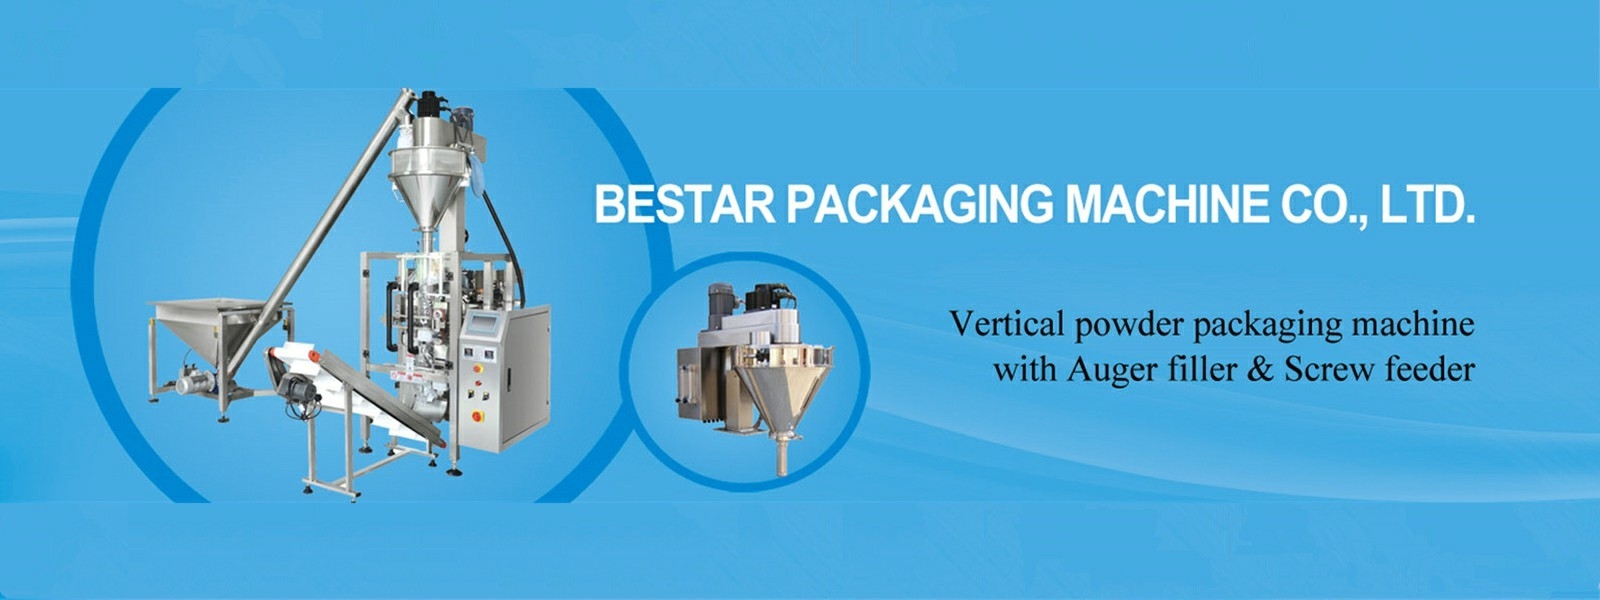 quality Powder Vertical Packaging Machine factory